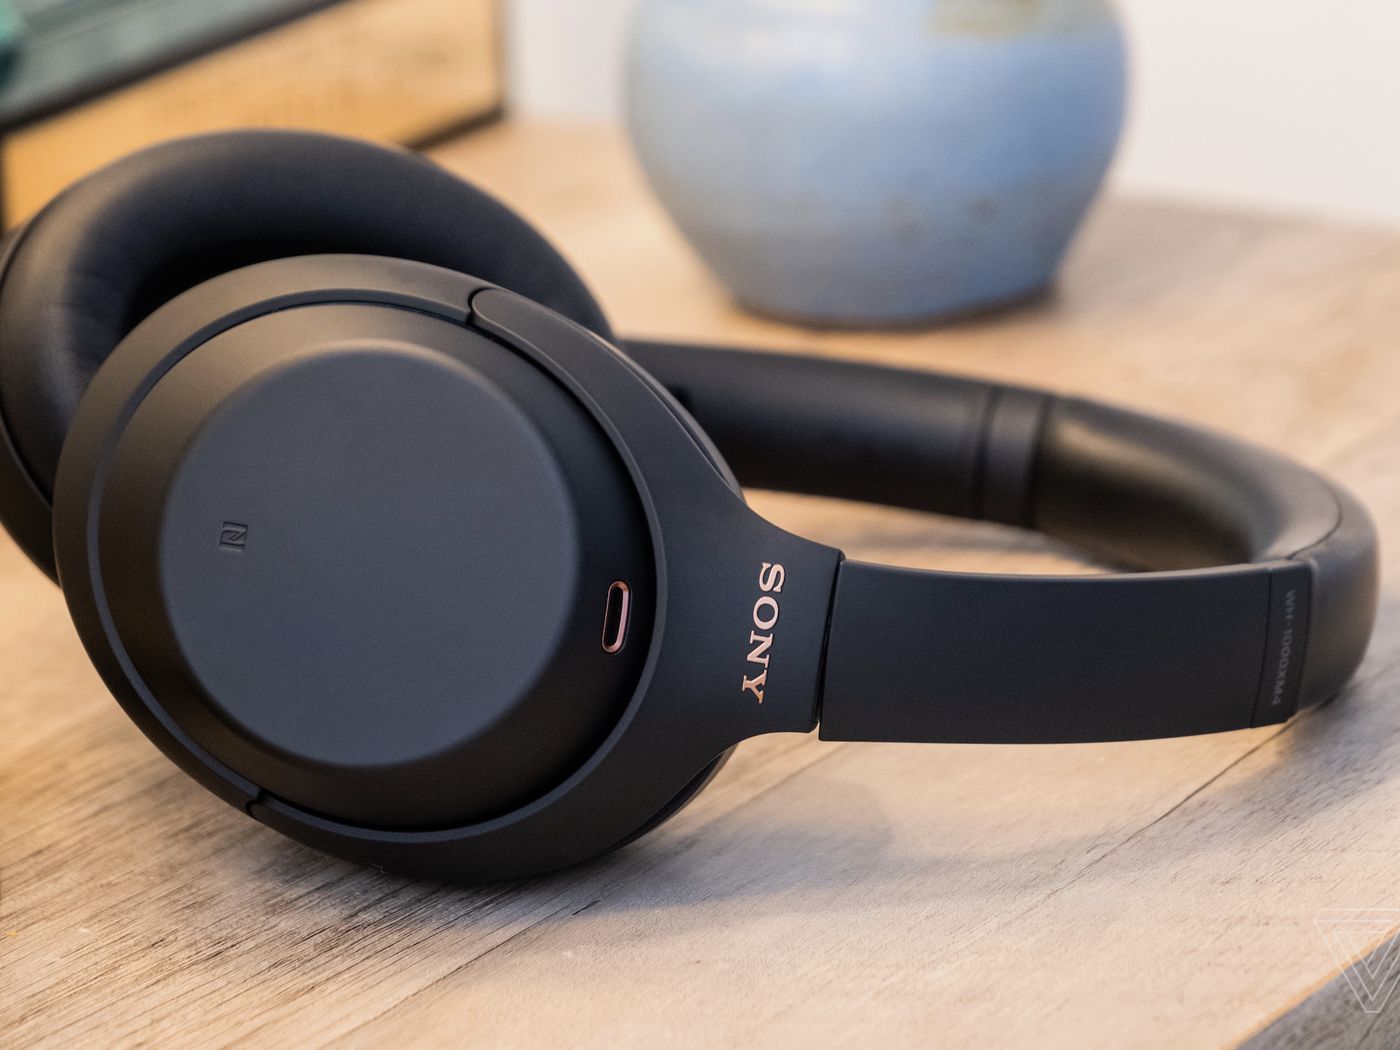 Sony's WH-1000XM4 noise-canceling headphones are $298 at Amazon